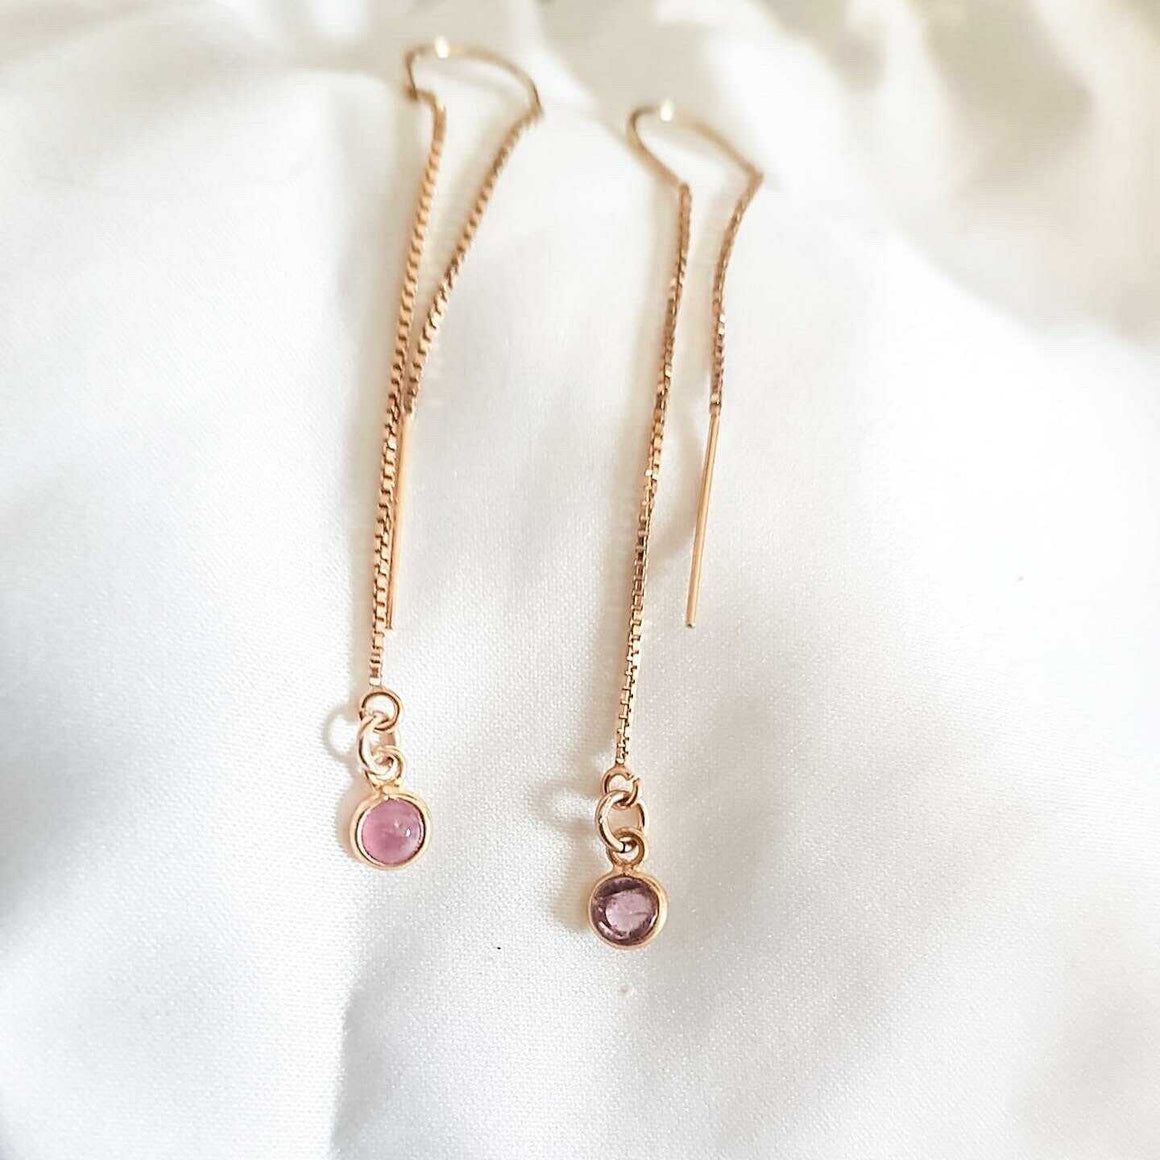 Elongated gold earrings with tourmaline